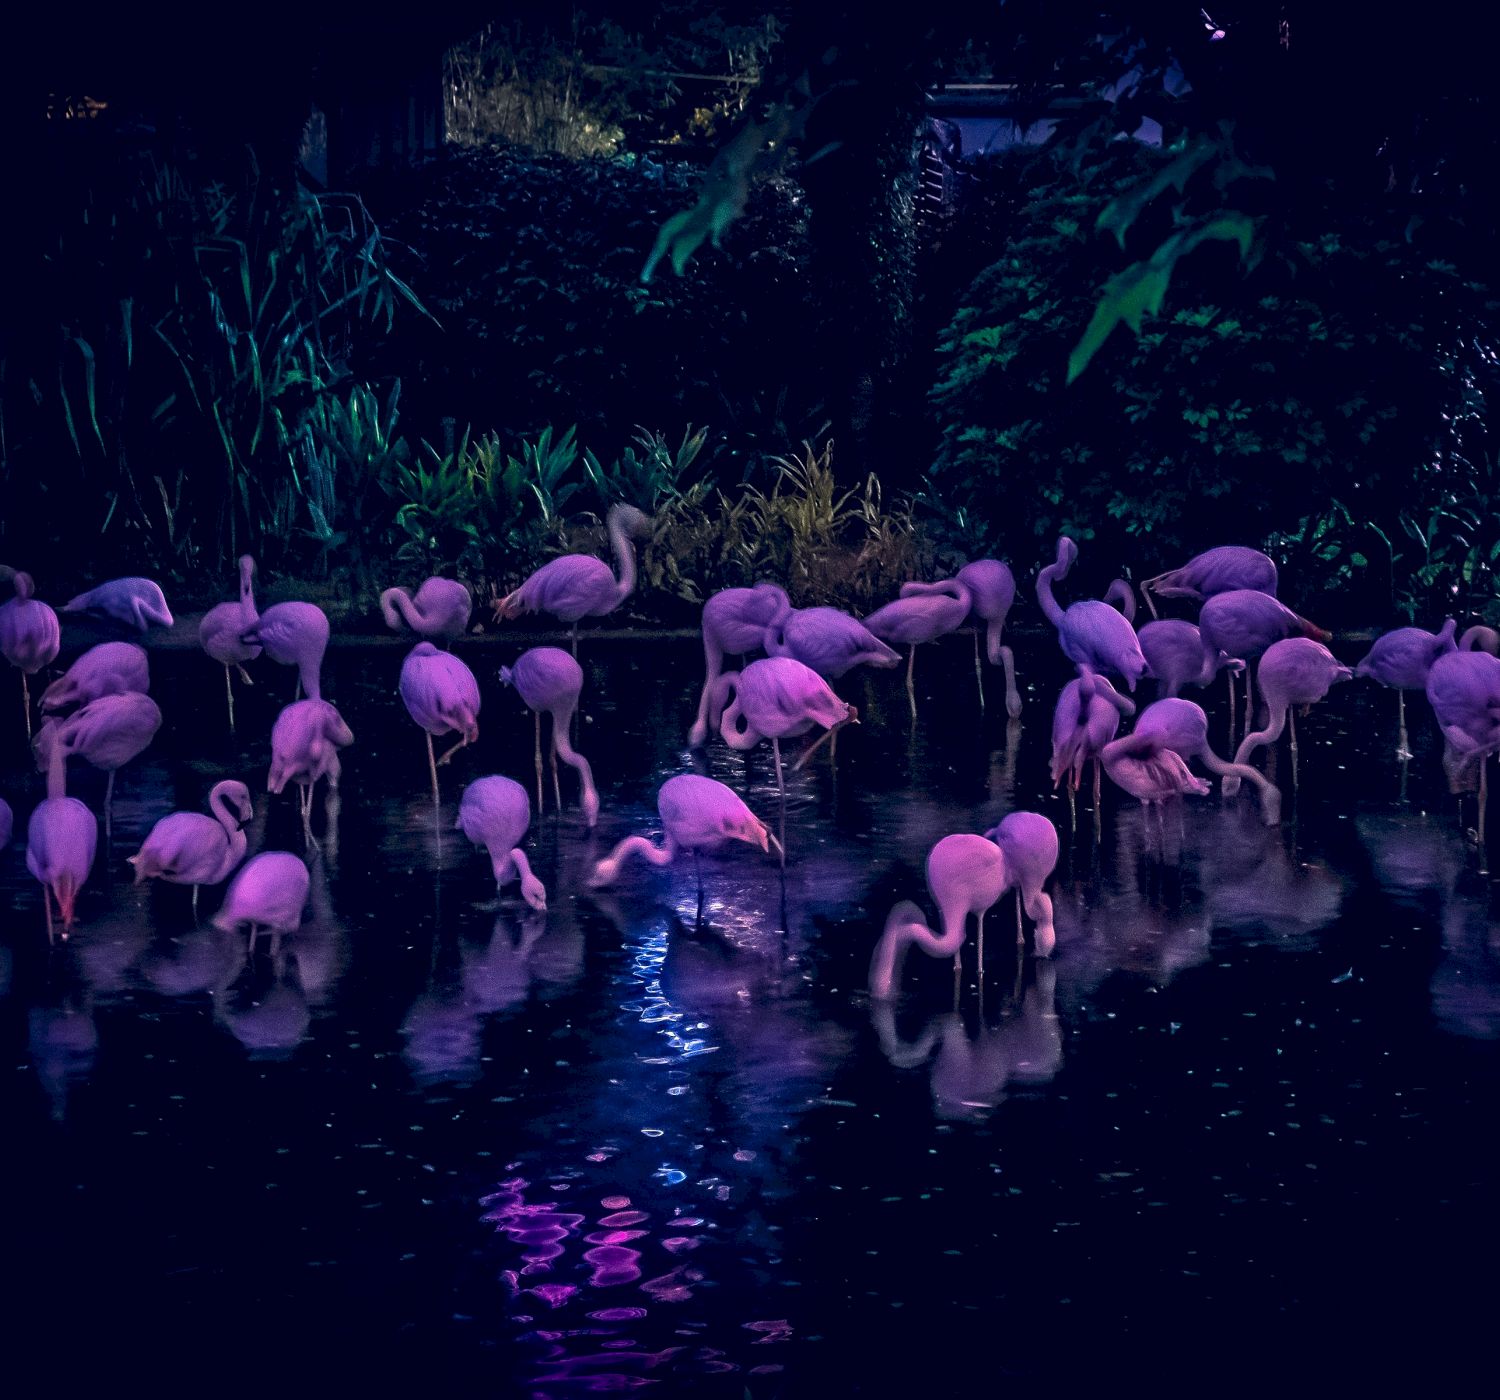 A group of pink flamingos is gathered near a water body at night, illuminated by ambient lighting, creating a serene and picturesque scene.